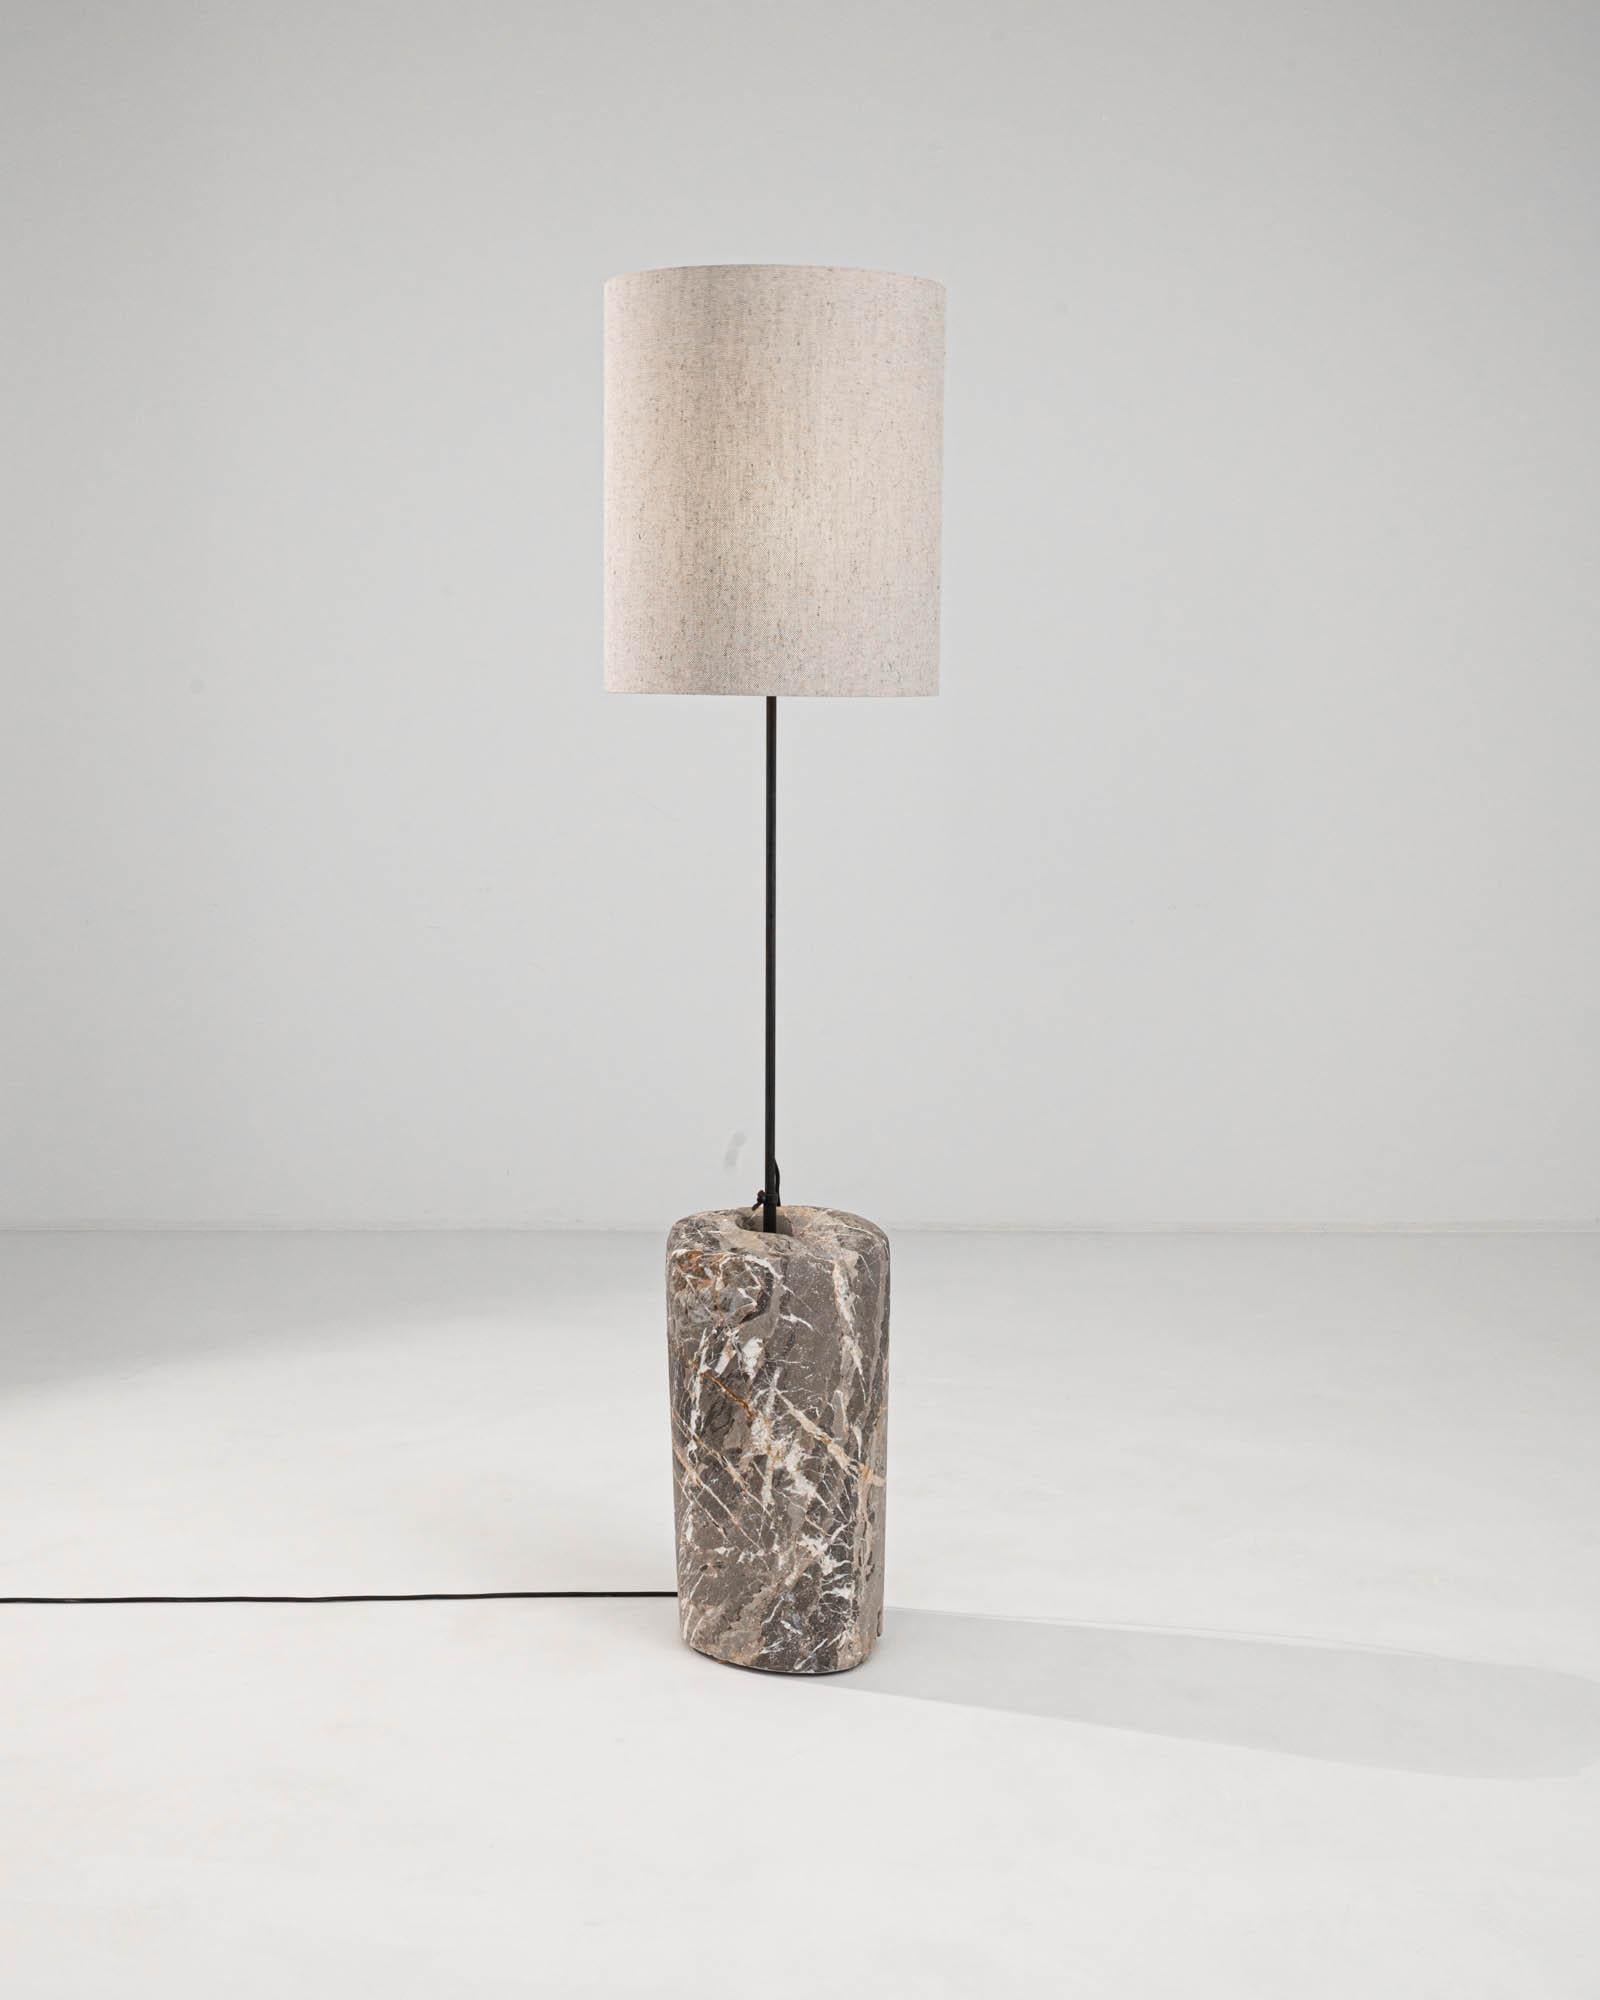 Illuminate your space with the timeless elegance of the 1900s European Marble & Metal Floor Lamp. A celebration of classic style and sophistication, this floor lamp features a genuine marble base, whose unique patterns and warm, earthy tones add an